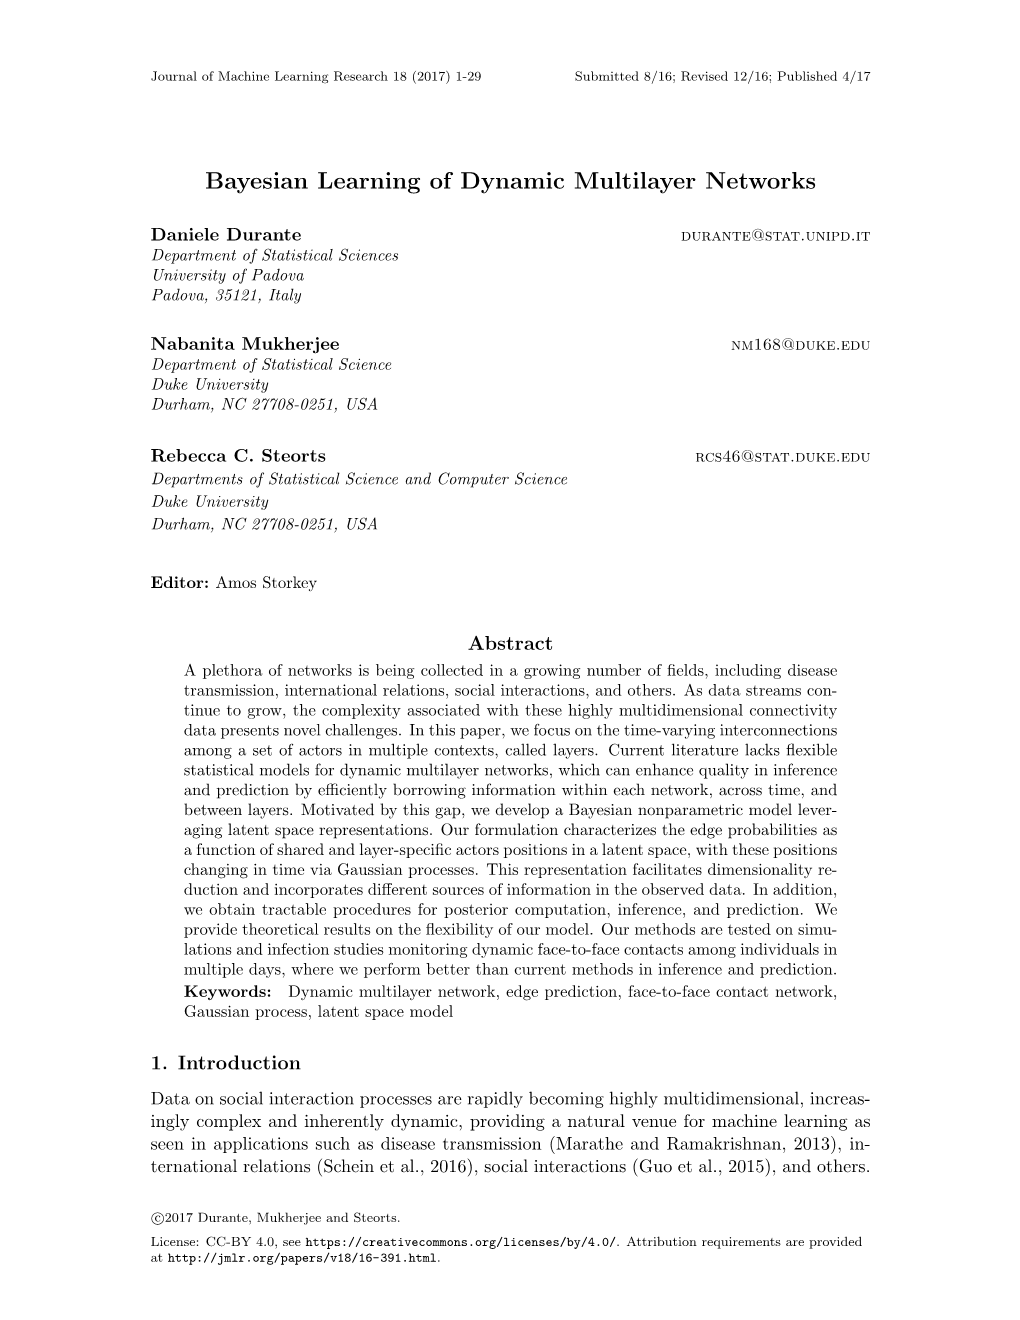 Bayesian Learning of Dynamic Multilayer Networks